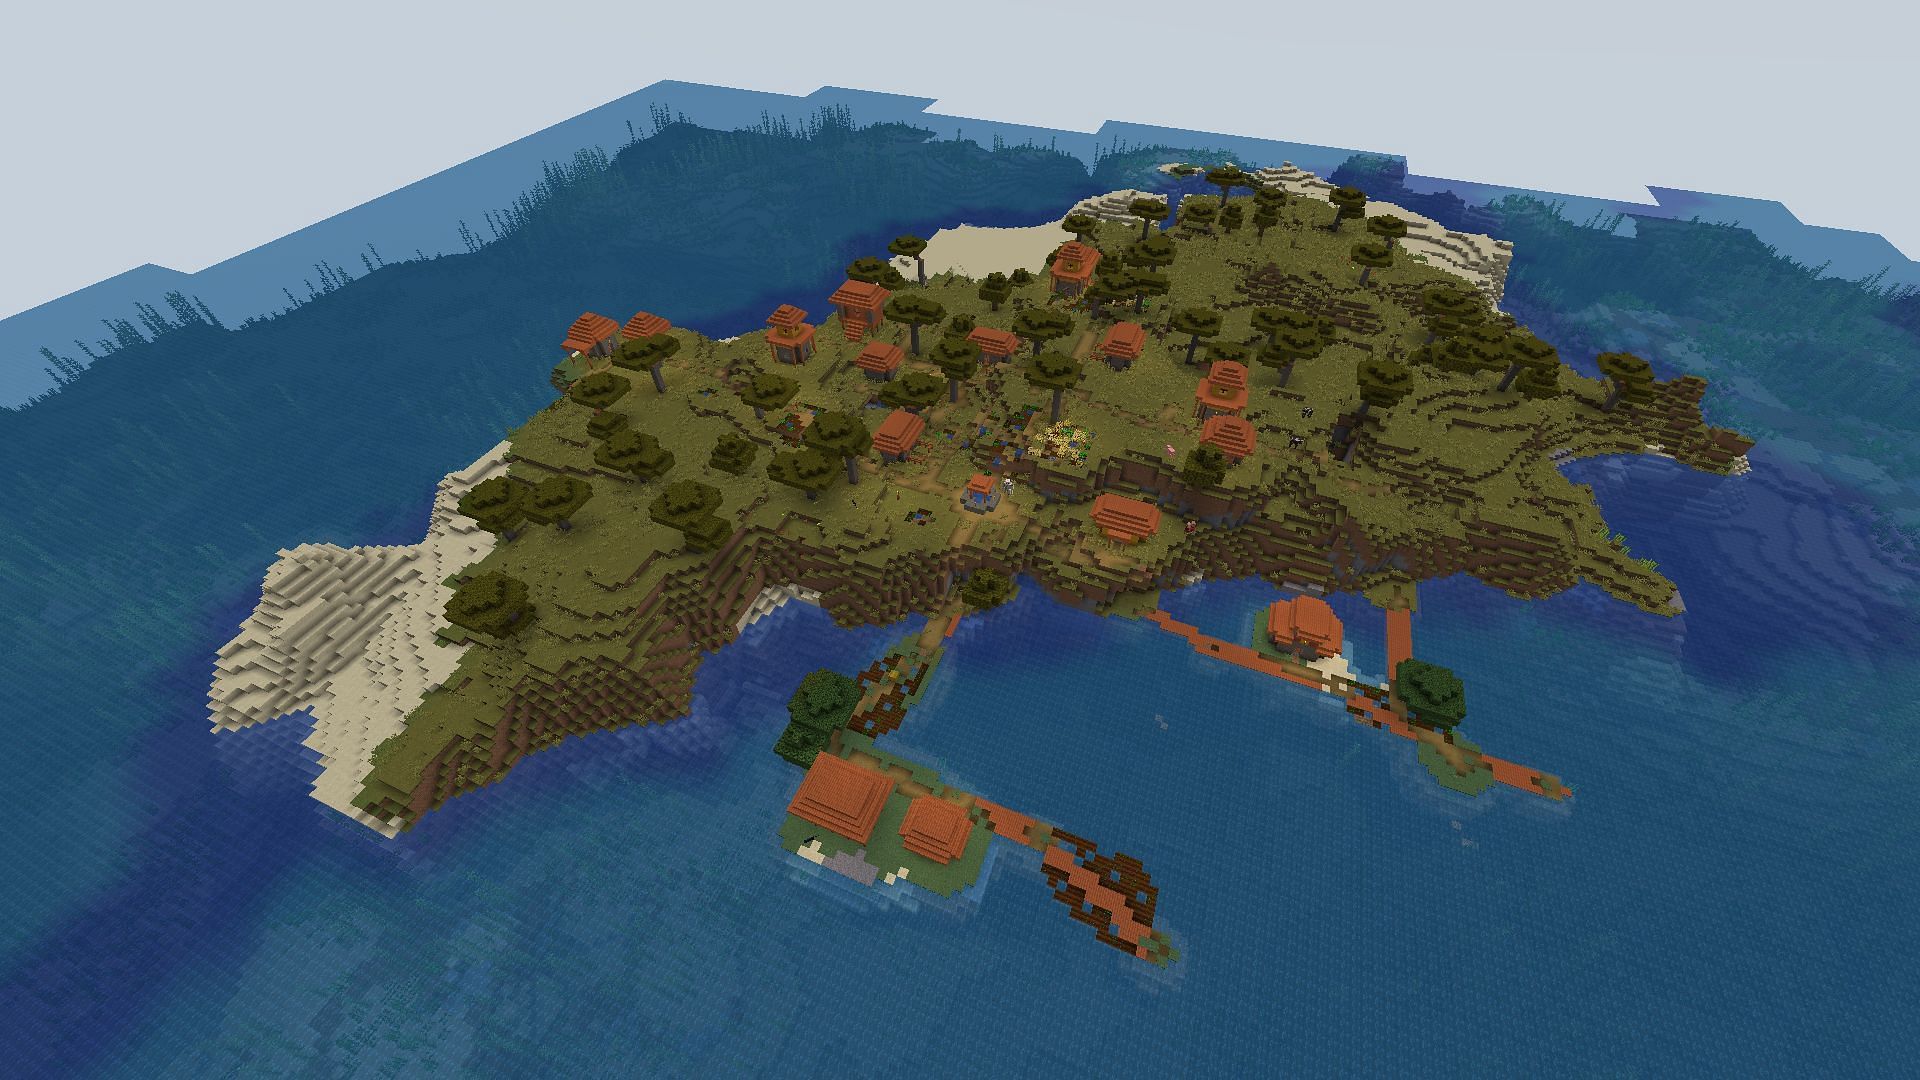 The spawn village in this seed sprawls across a small island (Image via Mojang)